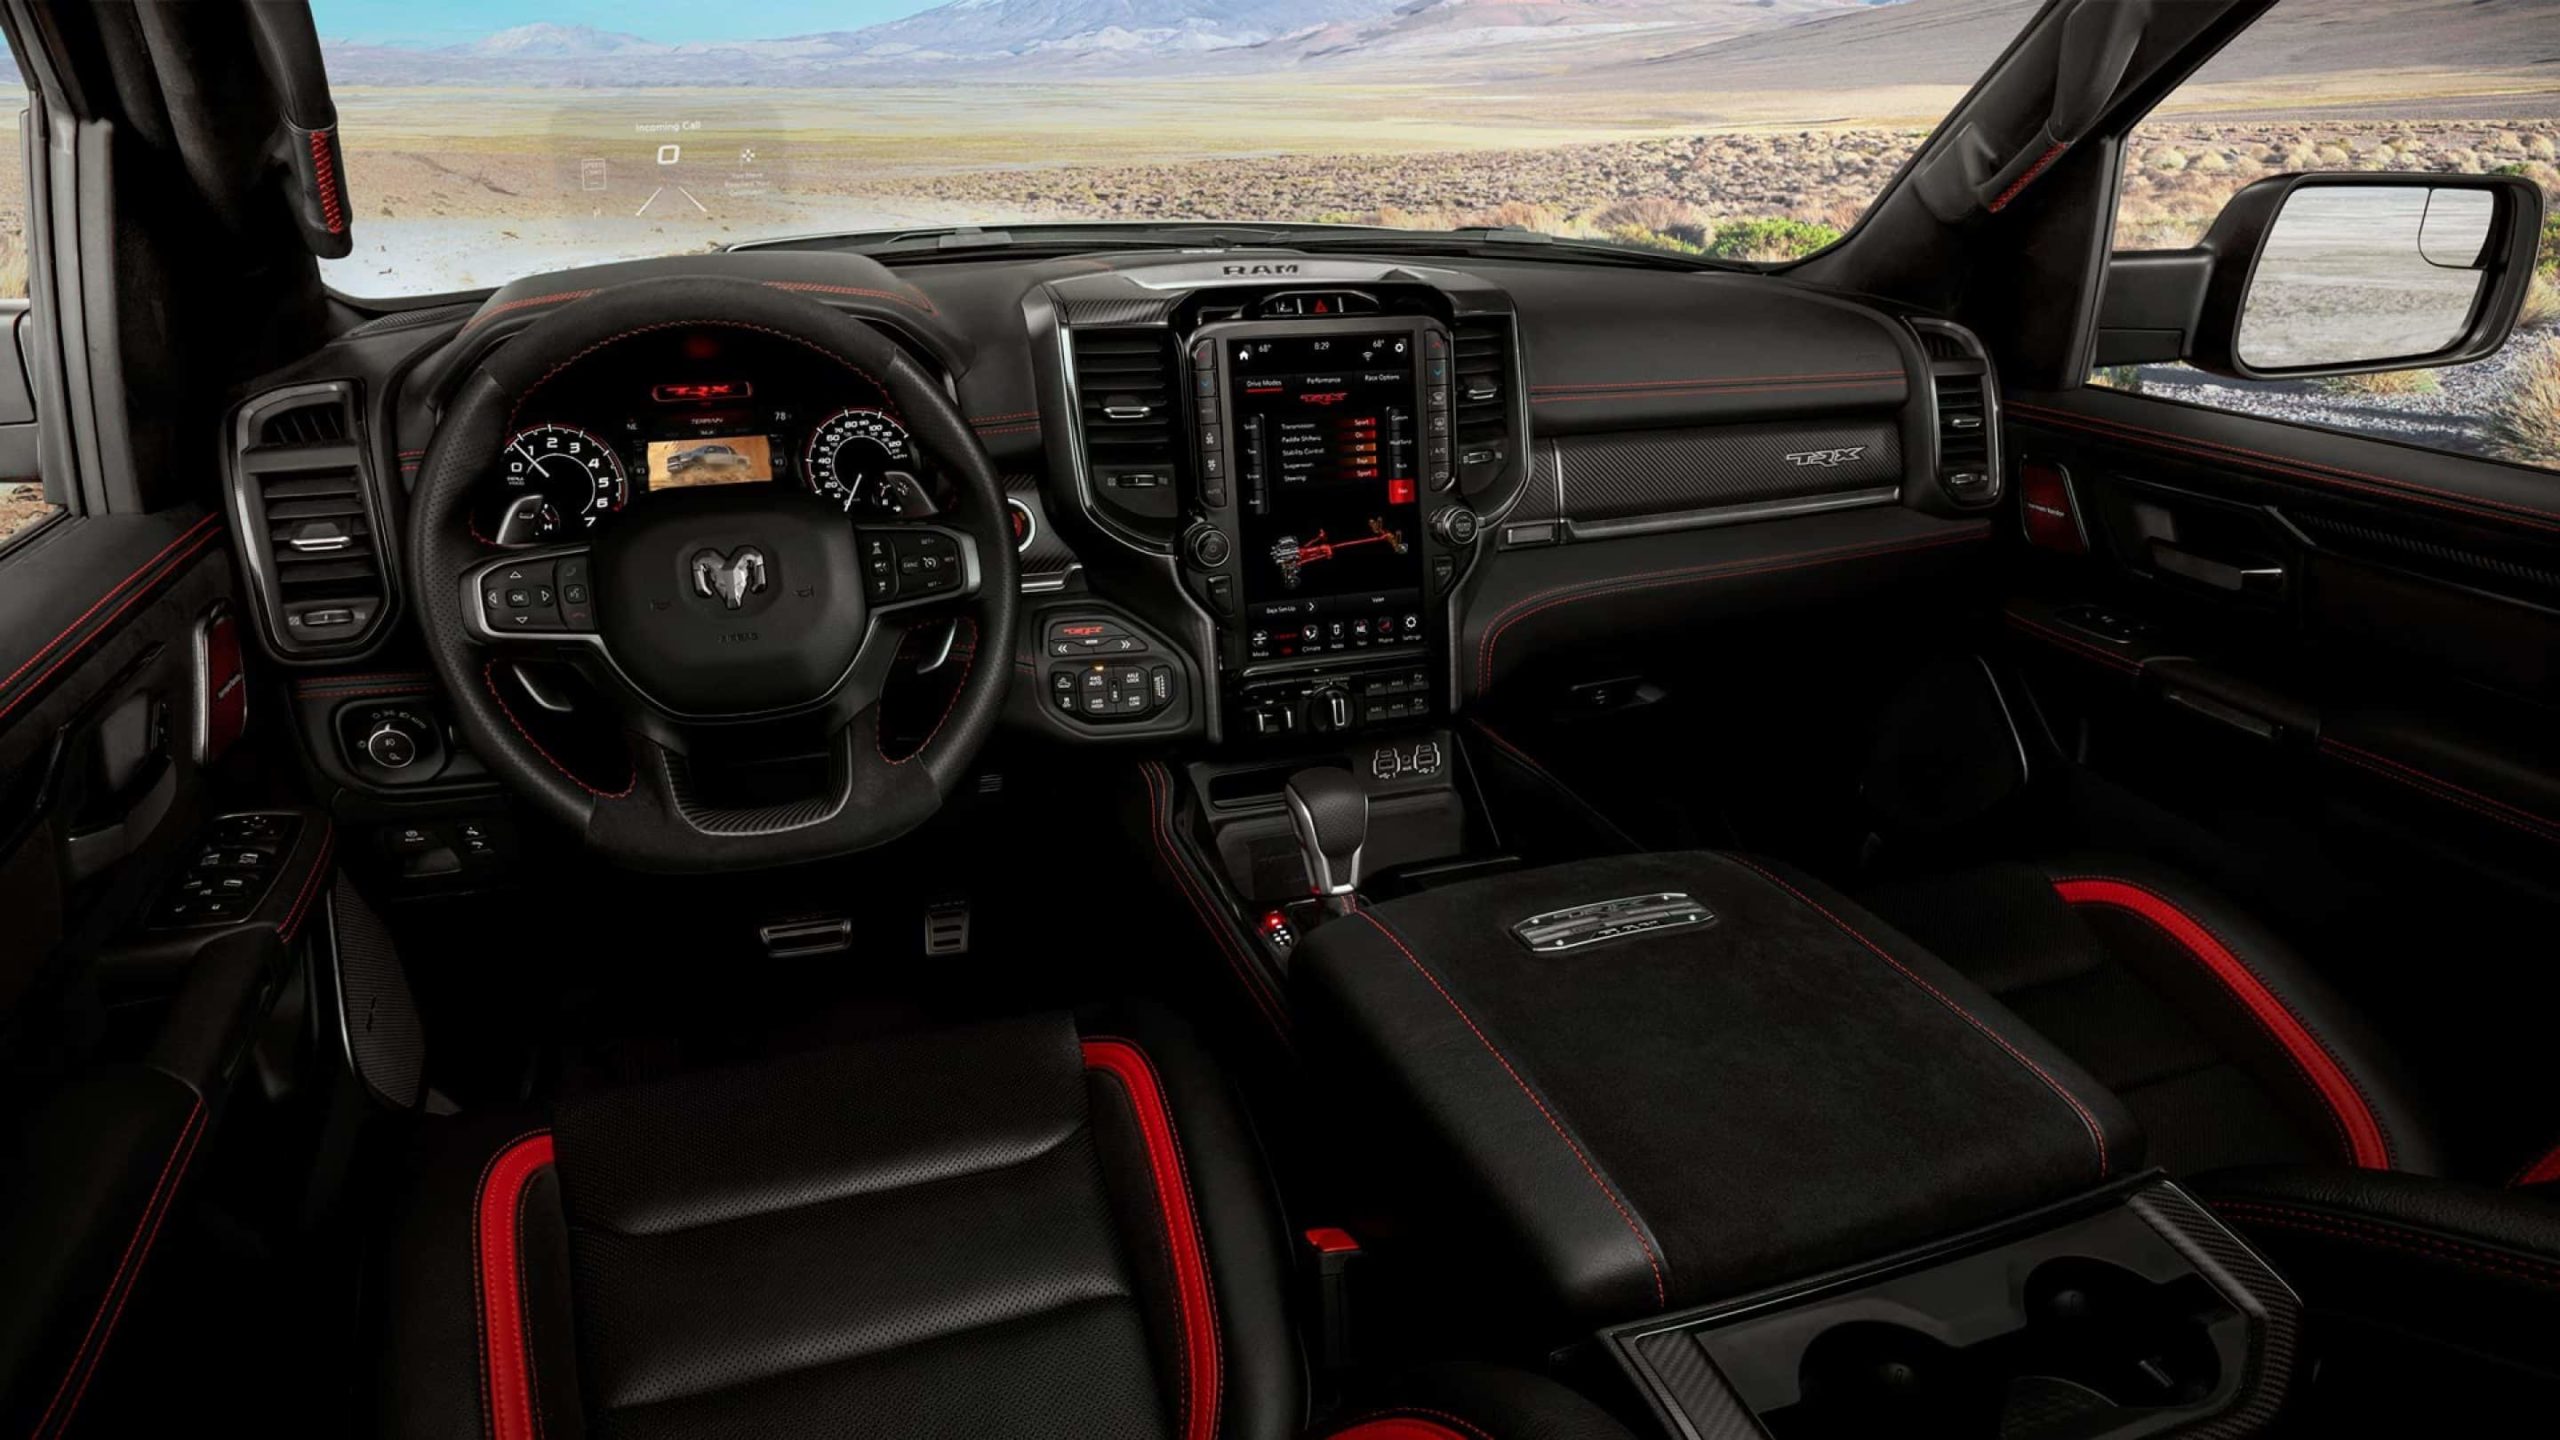 The interior on the new Ram 1500 TRX carries premium materials and uncommon refinement throughout. Boasting a host of new standard and available technologies—like the available virtual and reconfigurable Head-Up Display (HUD)—this beast was designed to meet the needs and wants of off-road adventurers.